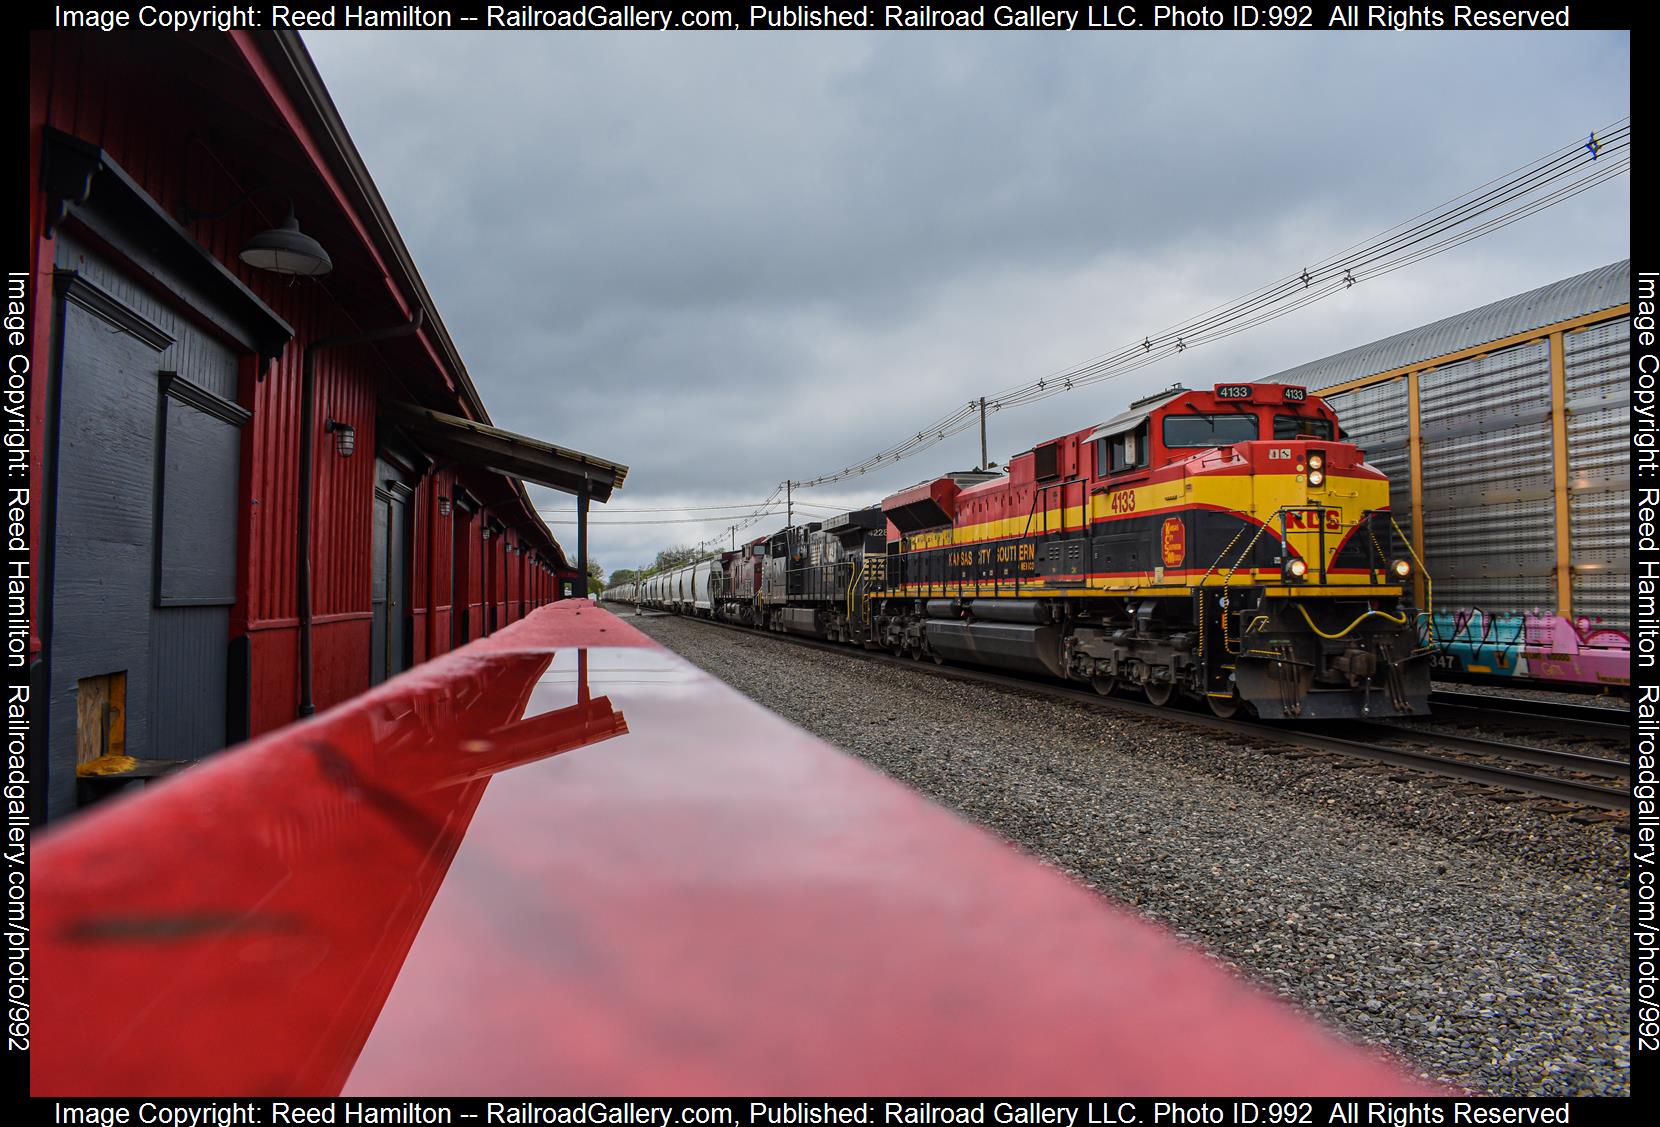 KCSM 4133 is a class EMD SD70ACe and  is pictured in Mishawaka, IN, United States.  This was taken along the NS Dearborn Division/Chicago Line on the Kansas City Southern Railway. Photo Copyright: Reed Hamilton uploaded to Railroad Gallery on 04/23/2023. This photograph of KCSM 4133 was taken on Sunday, April 16, 2023. All Rights Reserved. 